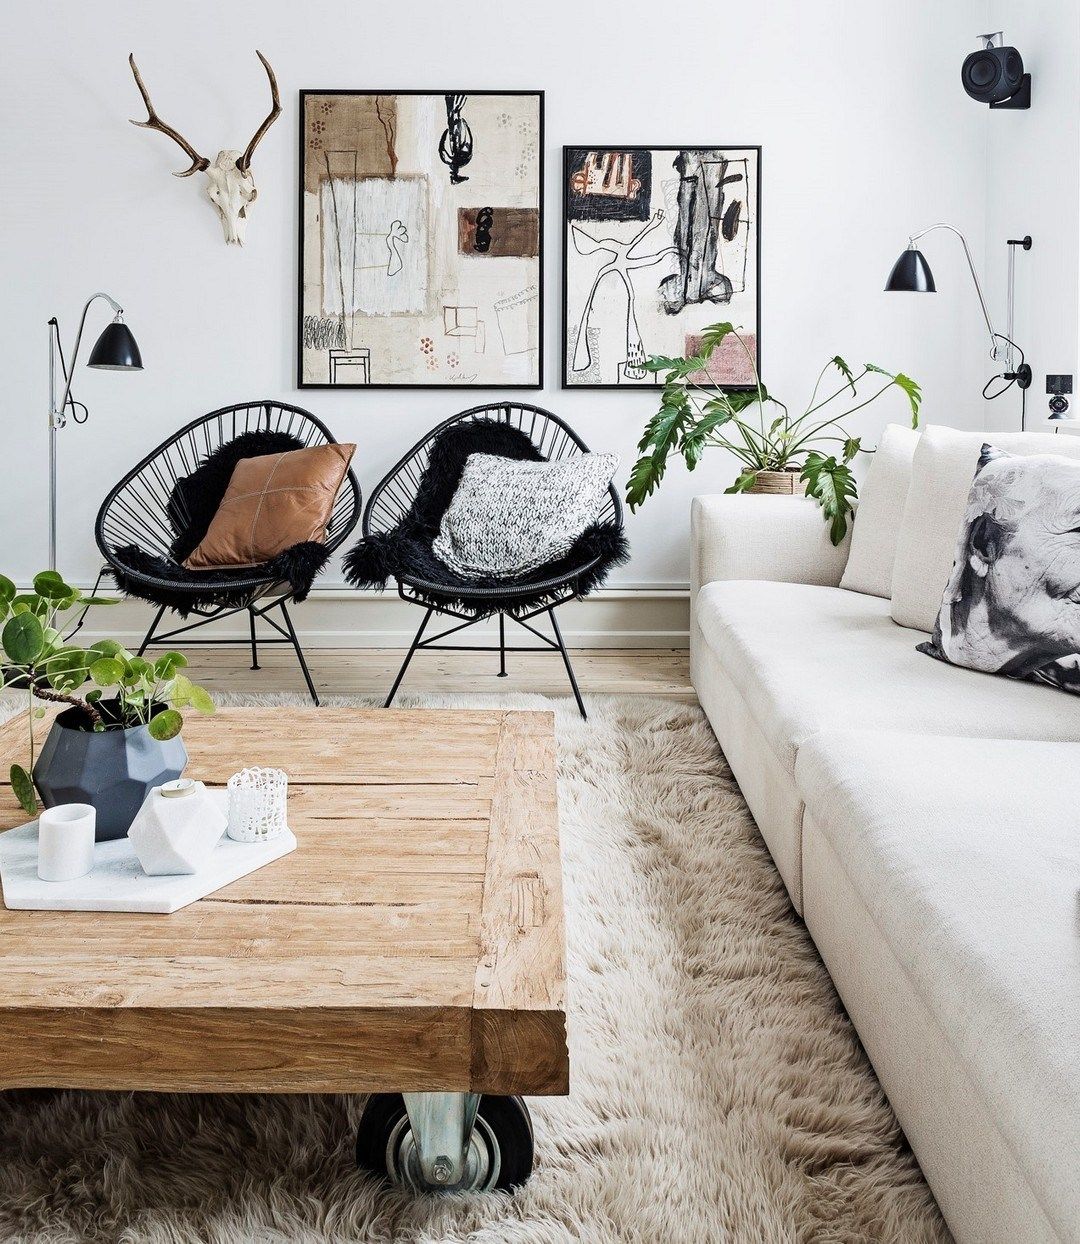 Scandinavian Furniture: Affordable And Chic Options For Your Home